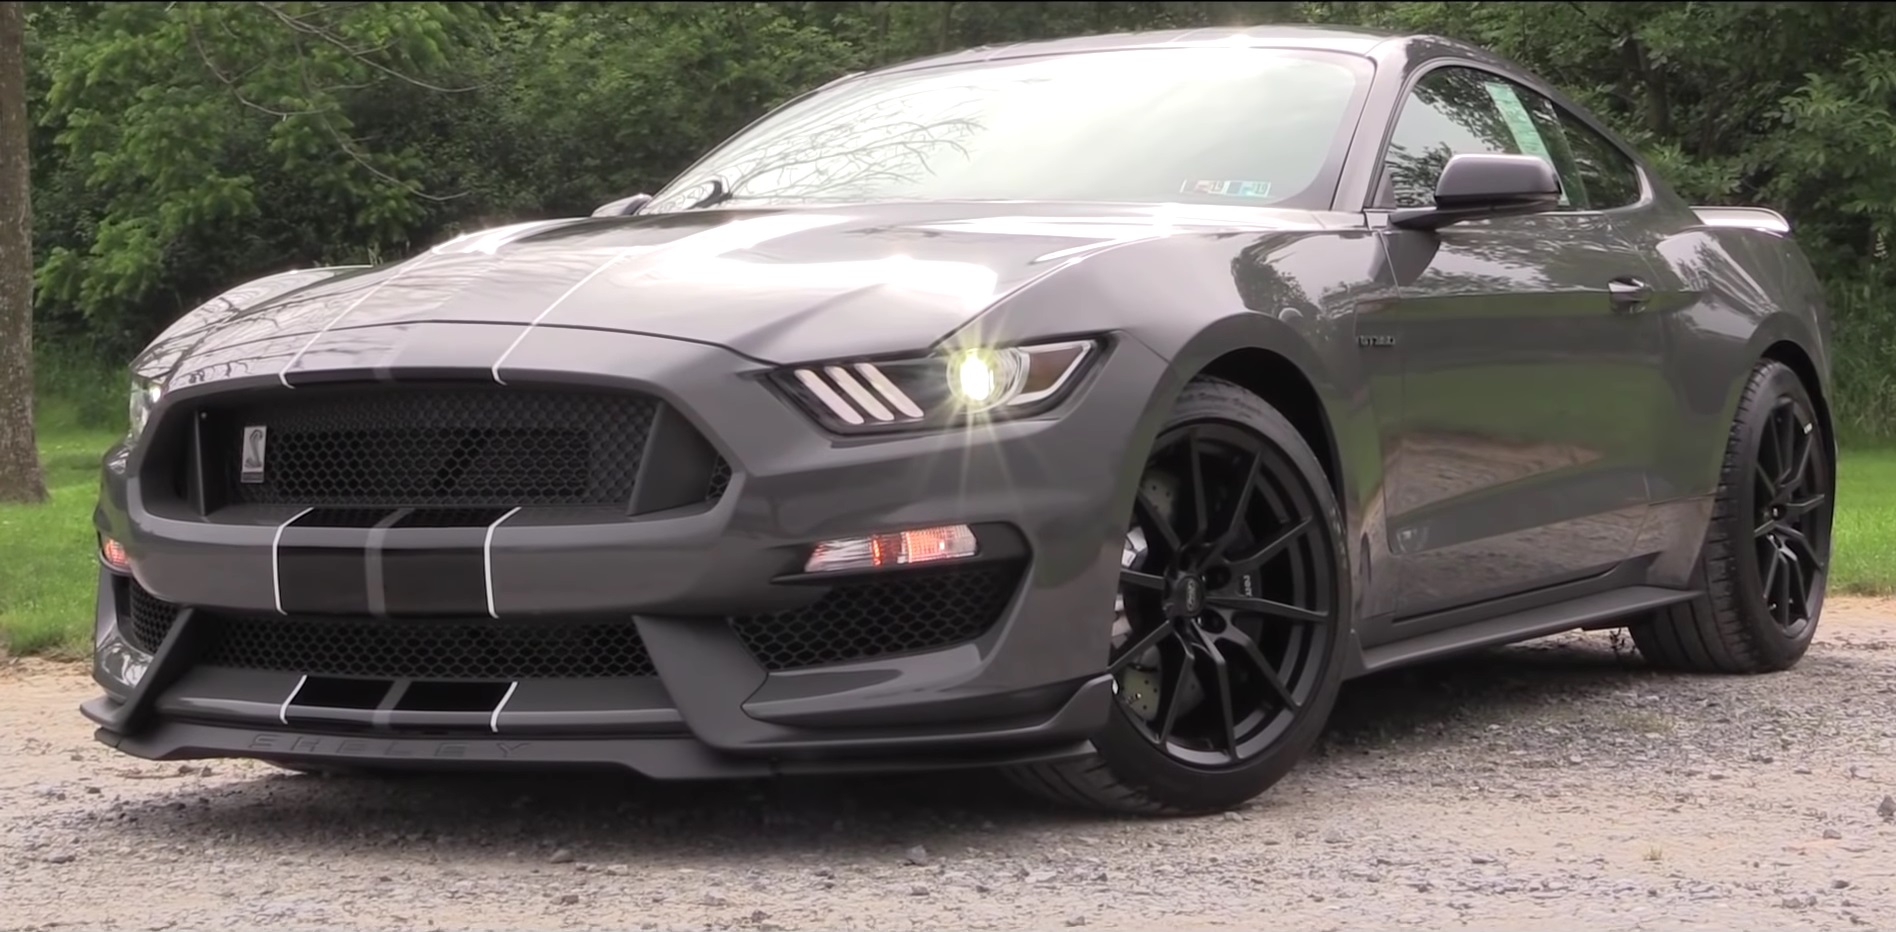 Video: 2018 Ford Mustang Shelby GT350 In-Depth Review